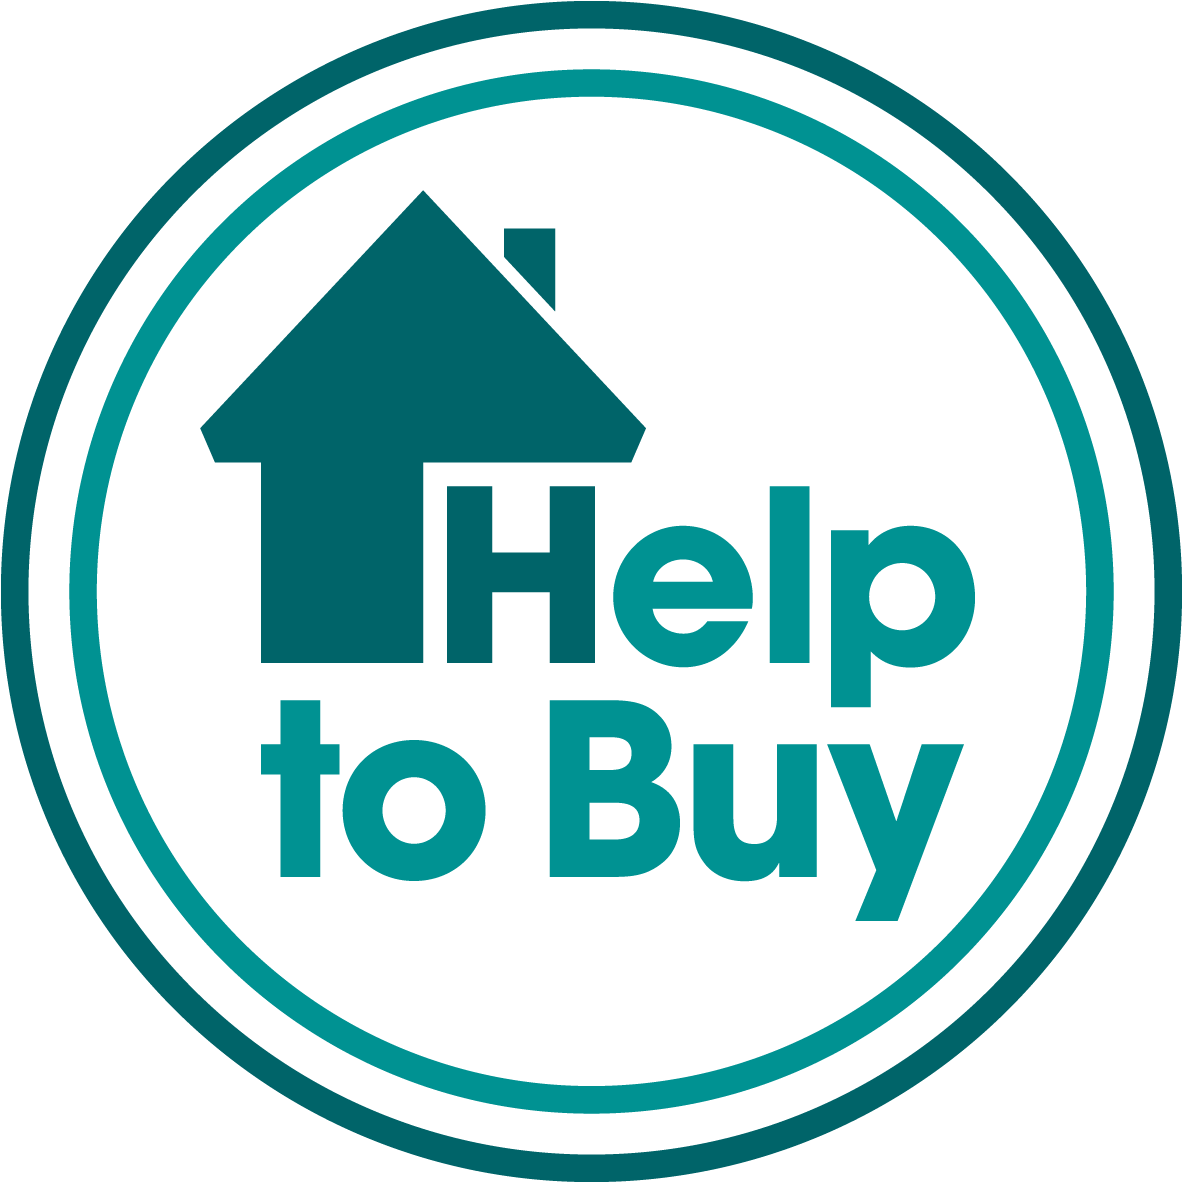 264-2649058_help-to-buy-logo.png